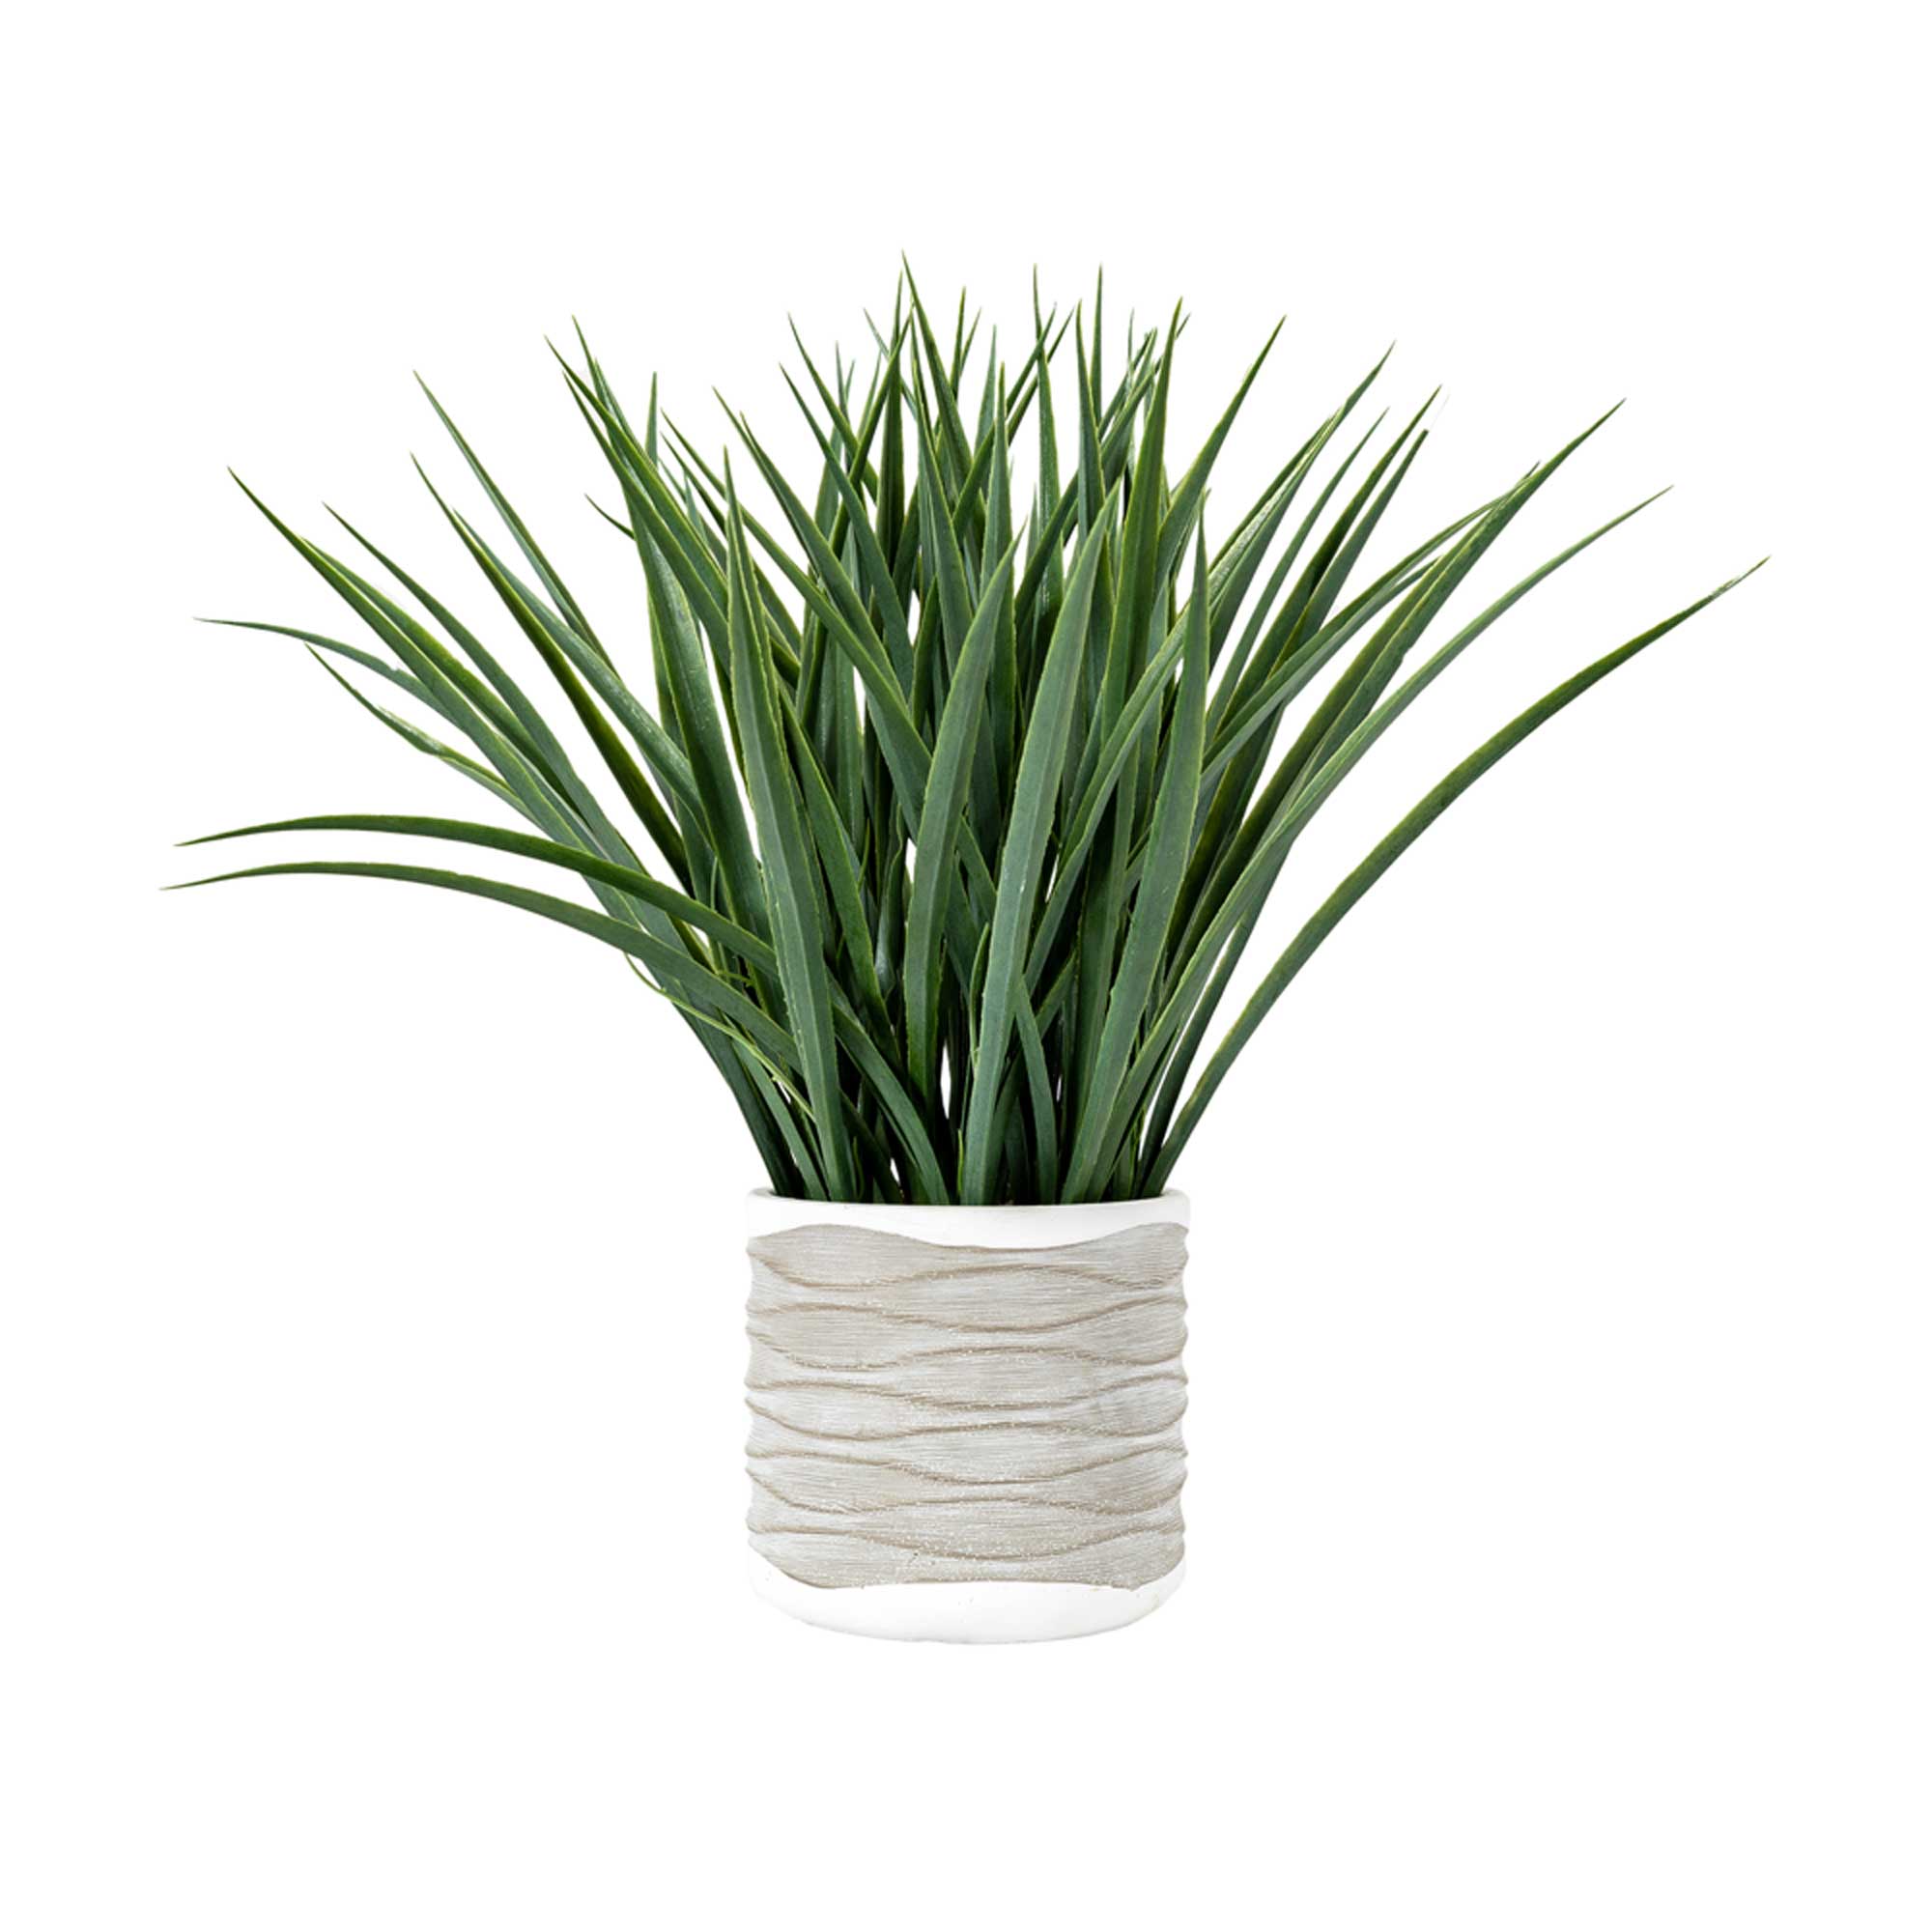 Potted Grass, Green | Barker & Stonehouse